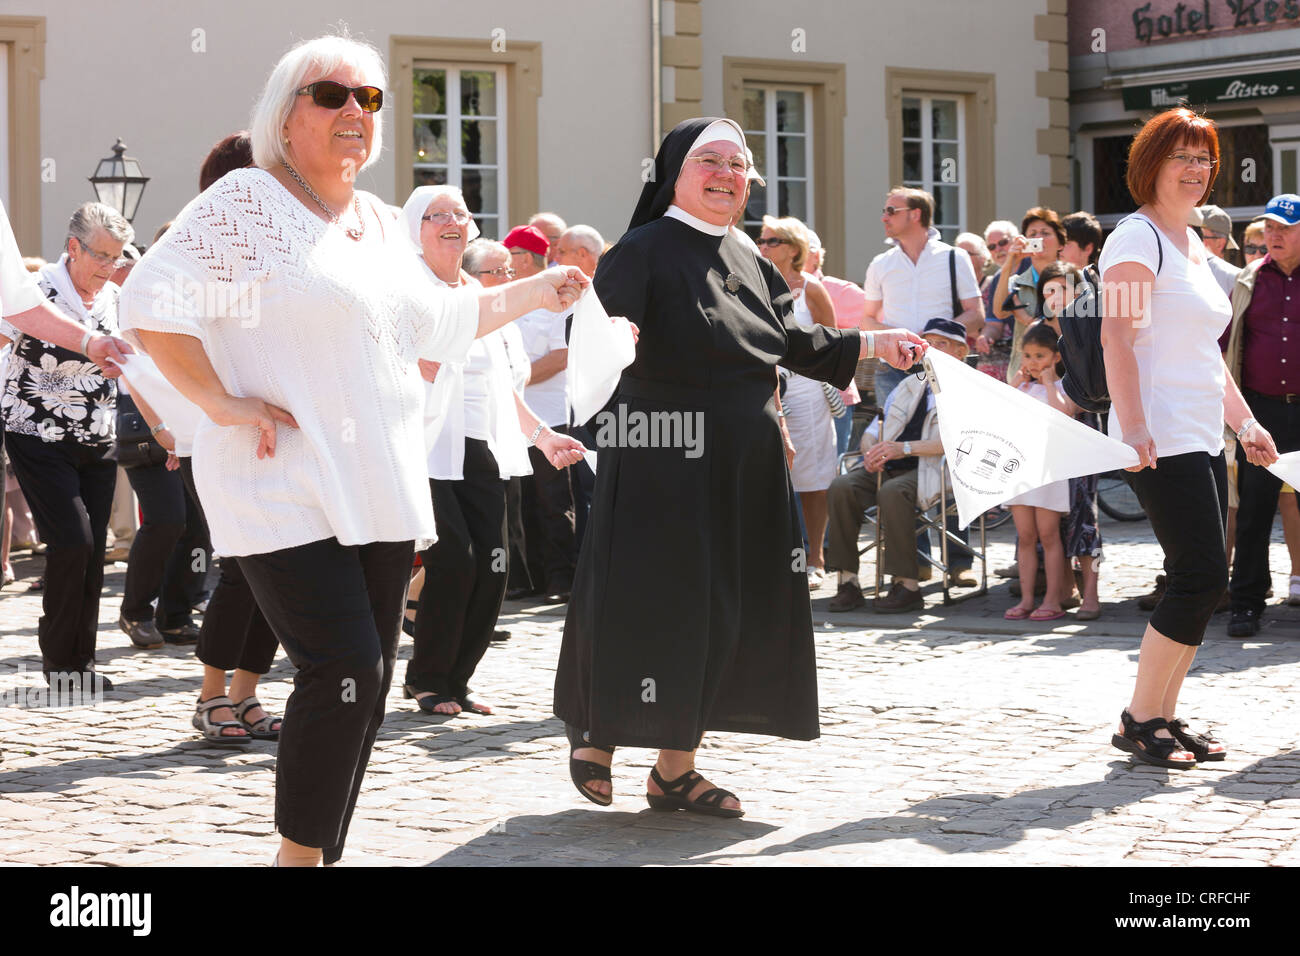 Nun dancing among other dancers in the streets of Echternach. Stock Photo